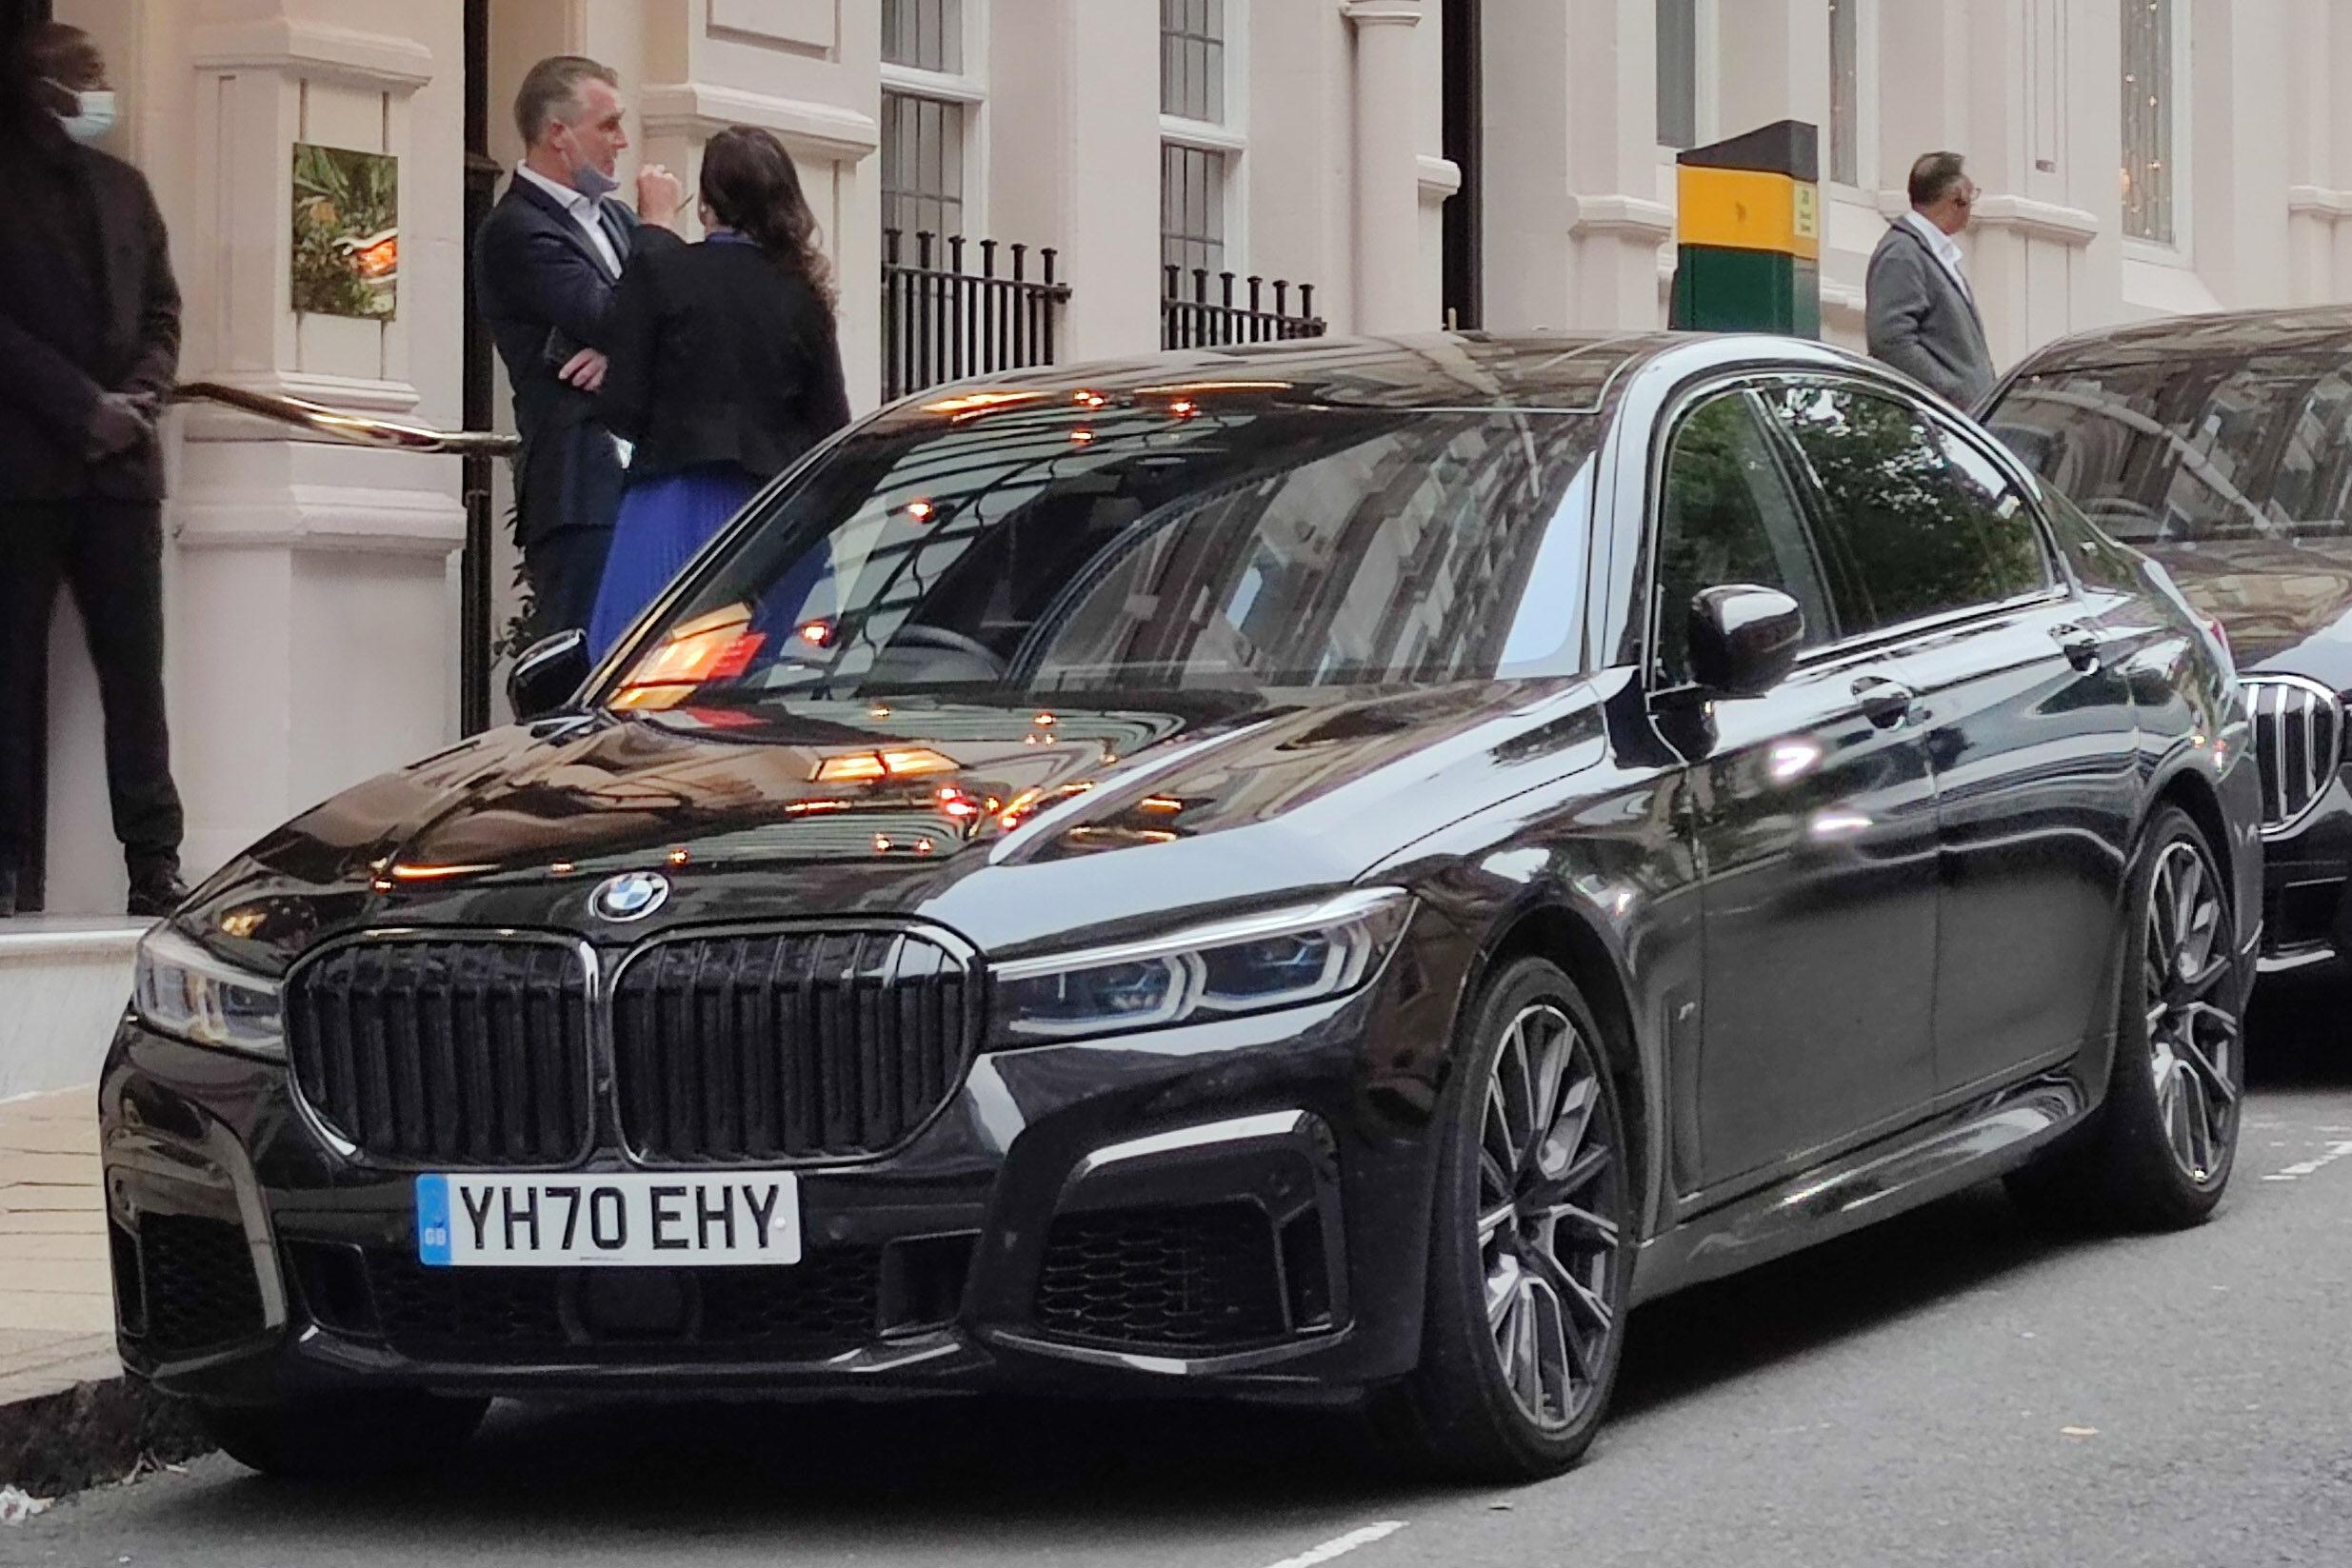 The BMW X7 owned by Tom Cruise parked outside The Grand Hotel on Church Street in Birmingham England on Tuesday August 24 the hours before it was stolen by car thieves early on Wednesday Augu